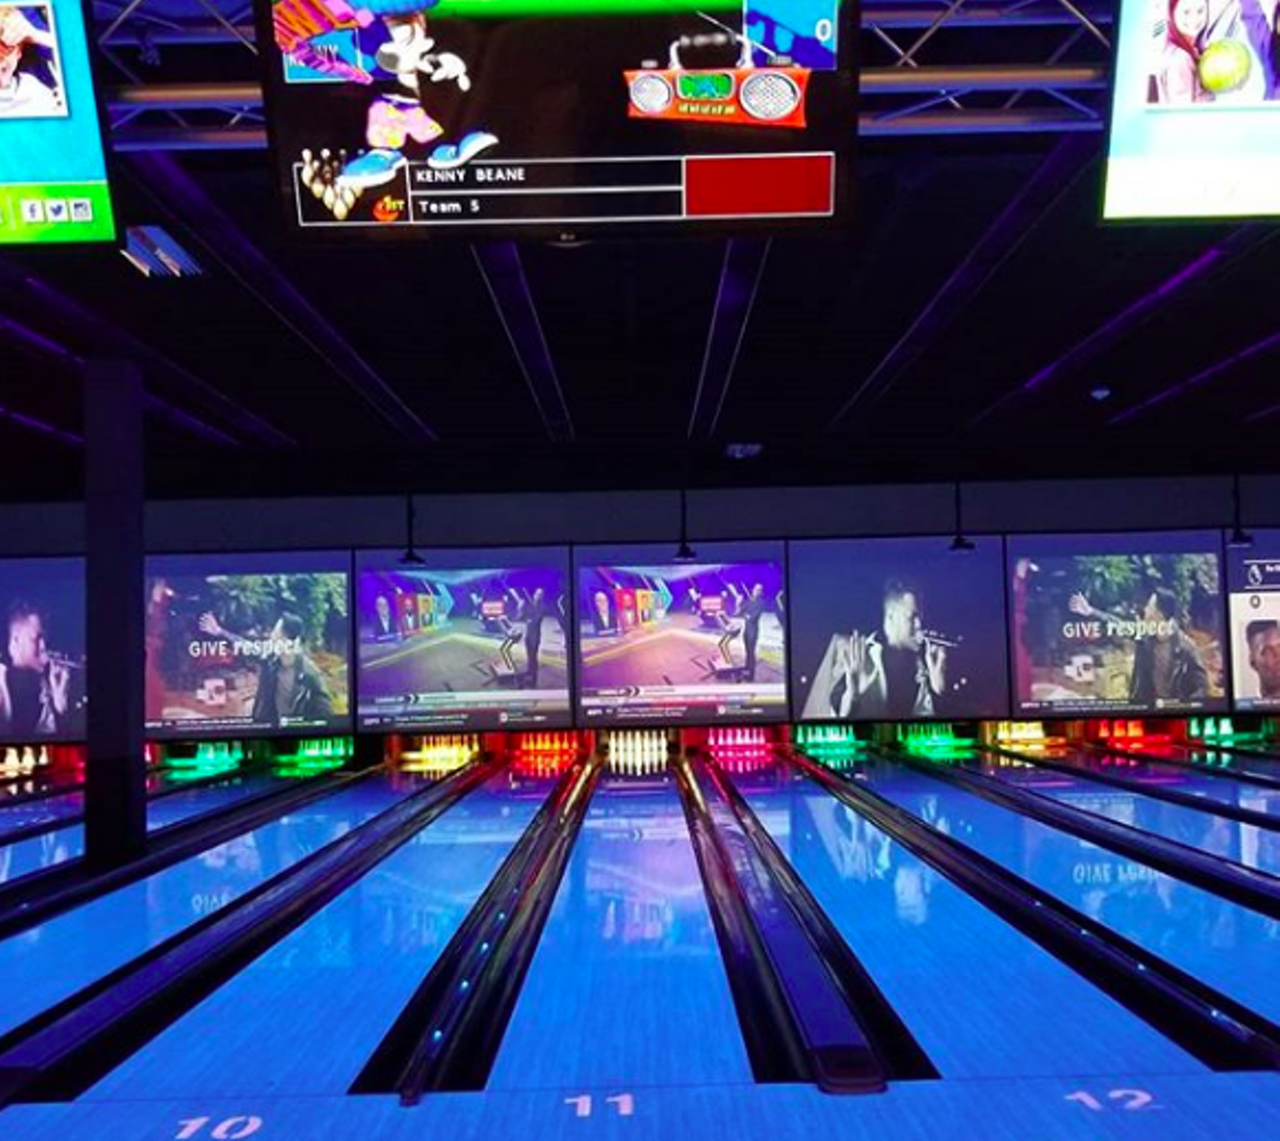 Have all sorts of fun at Main Event Entertainment
Multiple locations, mainevent.com
Bowling. Laser tag. Mini golf. Gravity ropes. Arcade games. Billiards. Food. A full bar. Yes, Main Event has it all and yes, you will be entertained for hours.
Photo via Instagram / mr_fashionable_real_estate